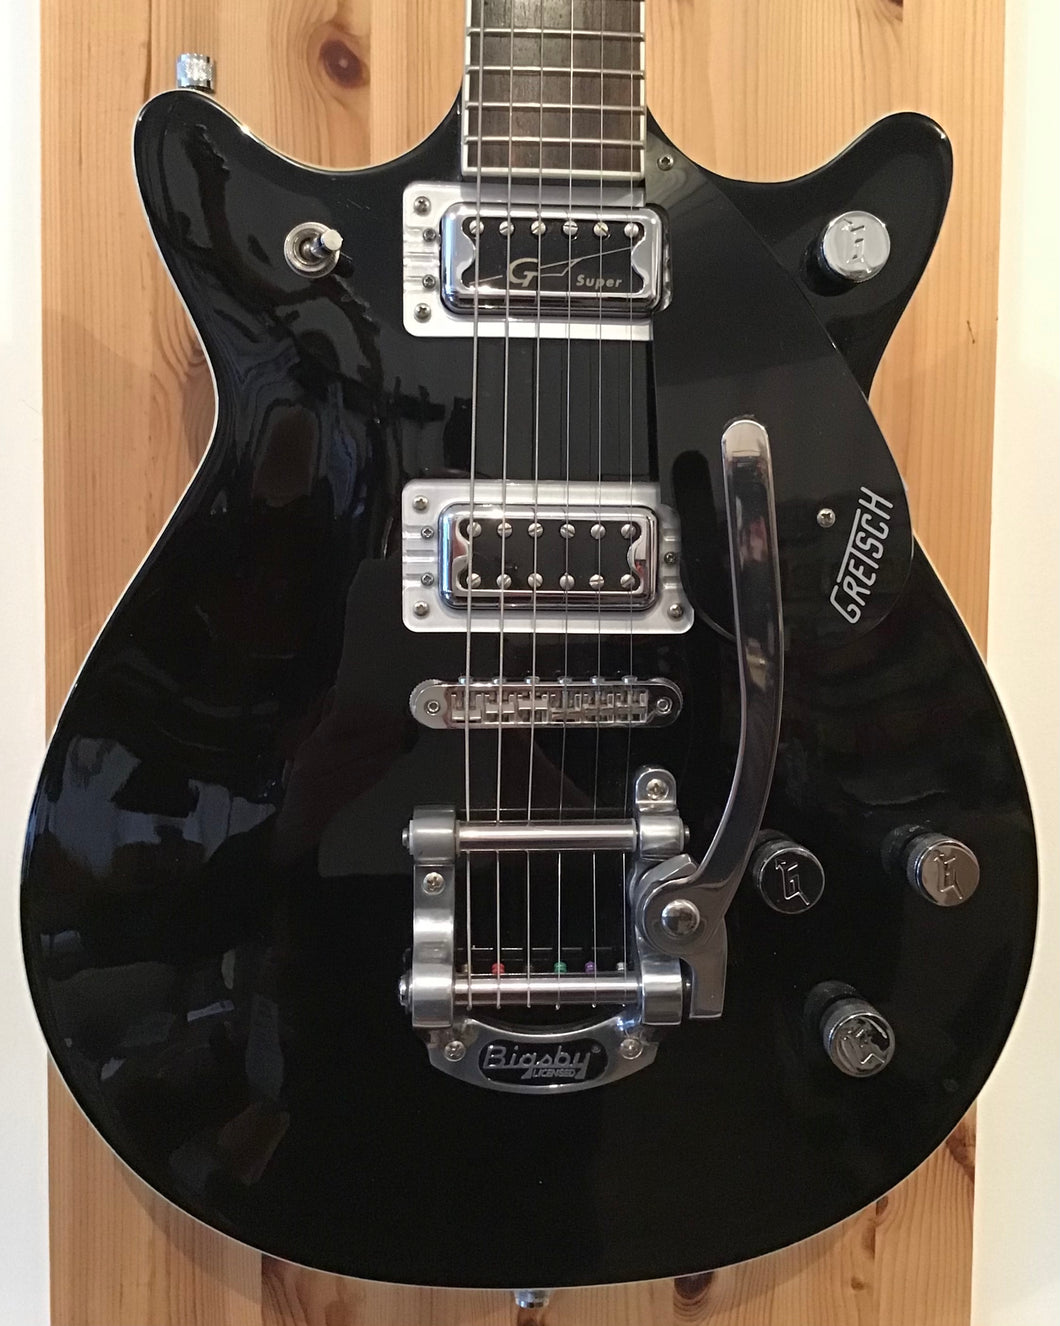 GRETSCH ELECTROMATIC G5232T DOUBLE JET BLACK - PRE OWNED (c)